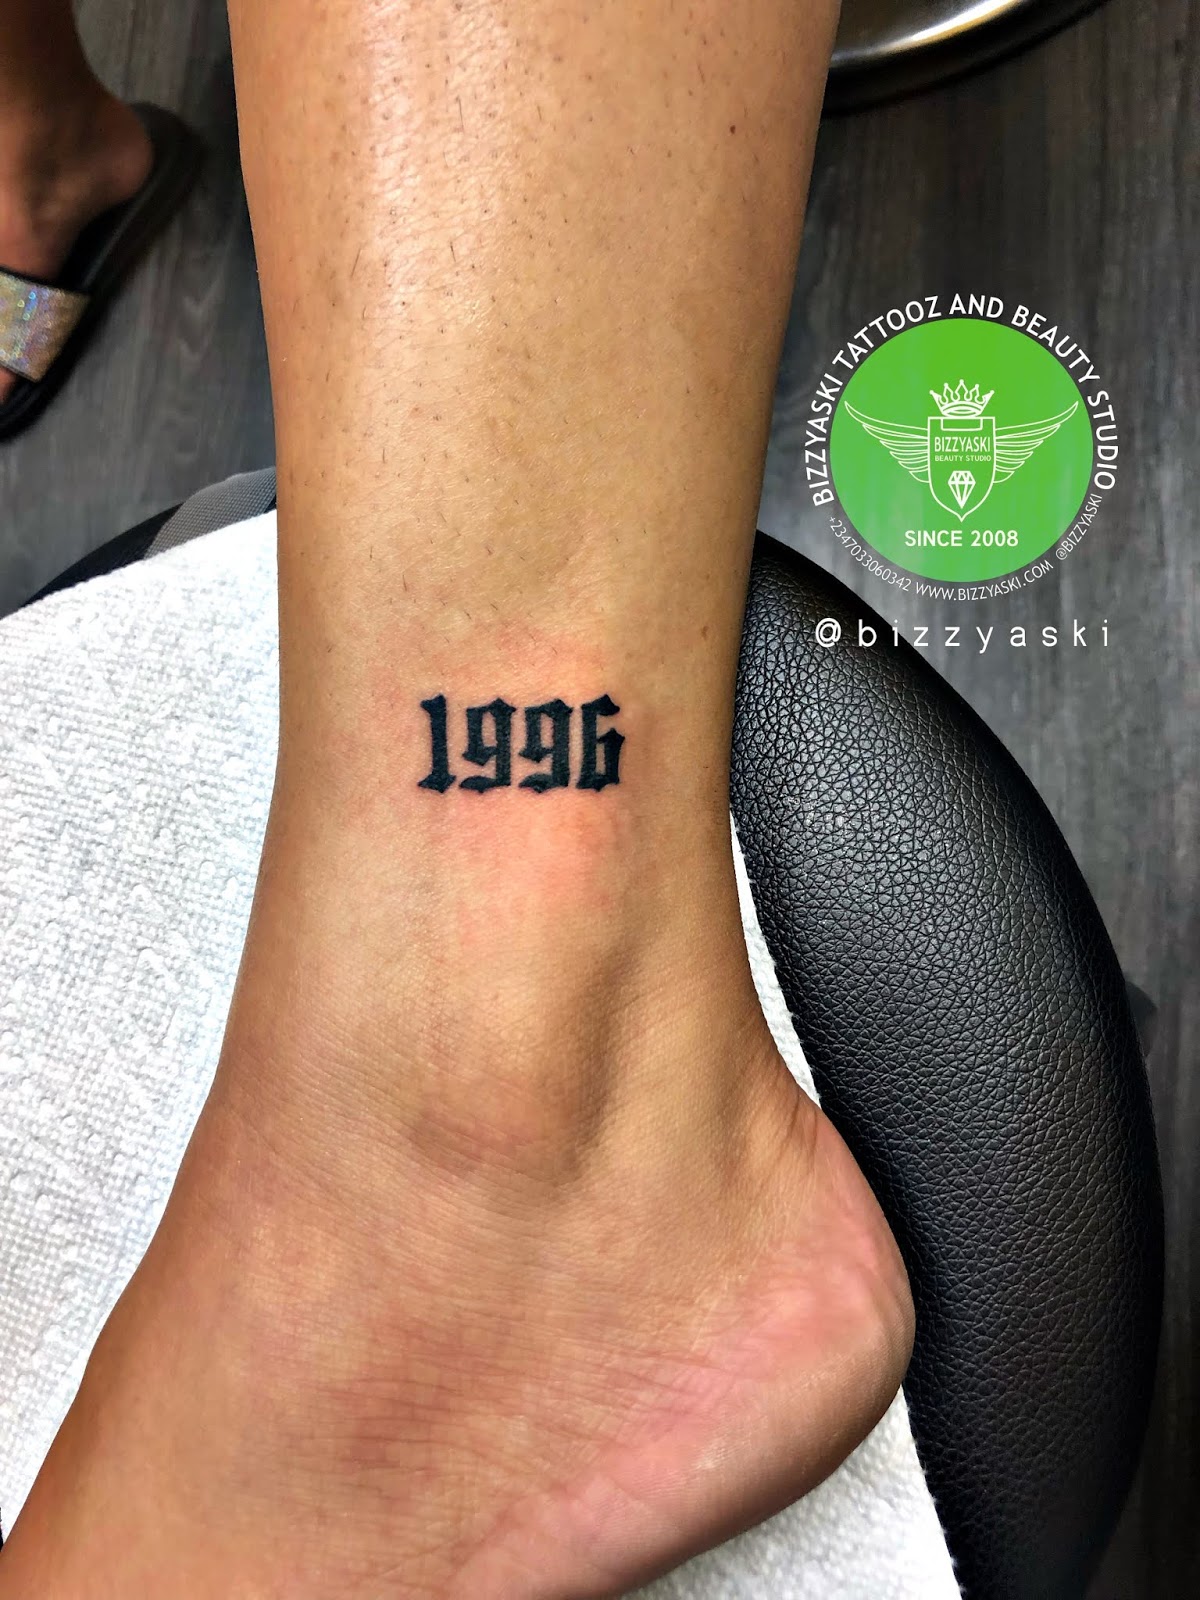 15 Best Places On Your Body For A Coordinates Tattoo | YourTango